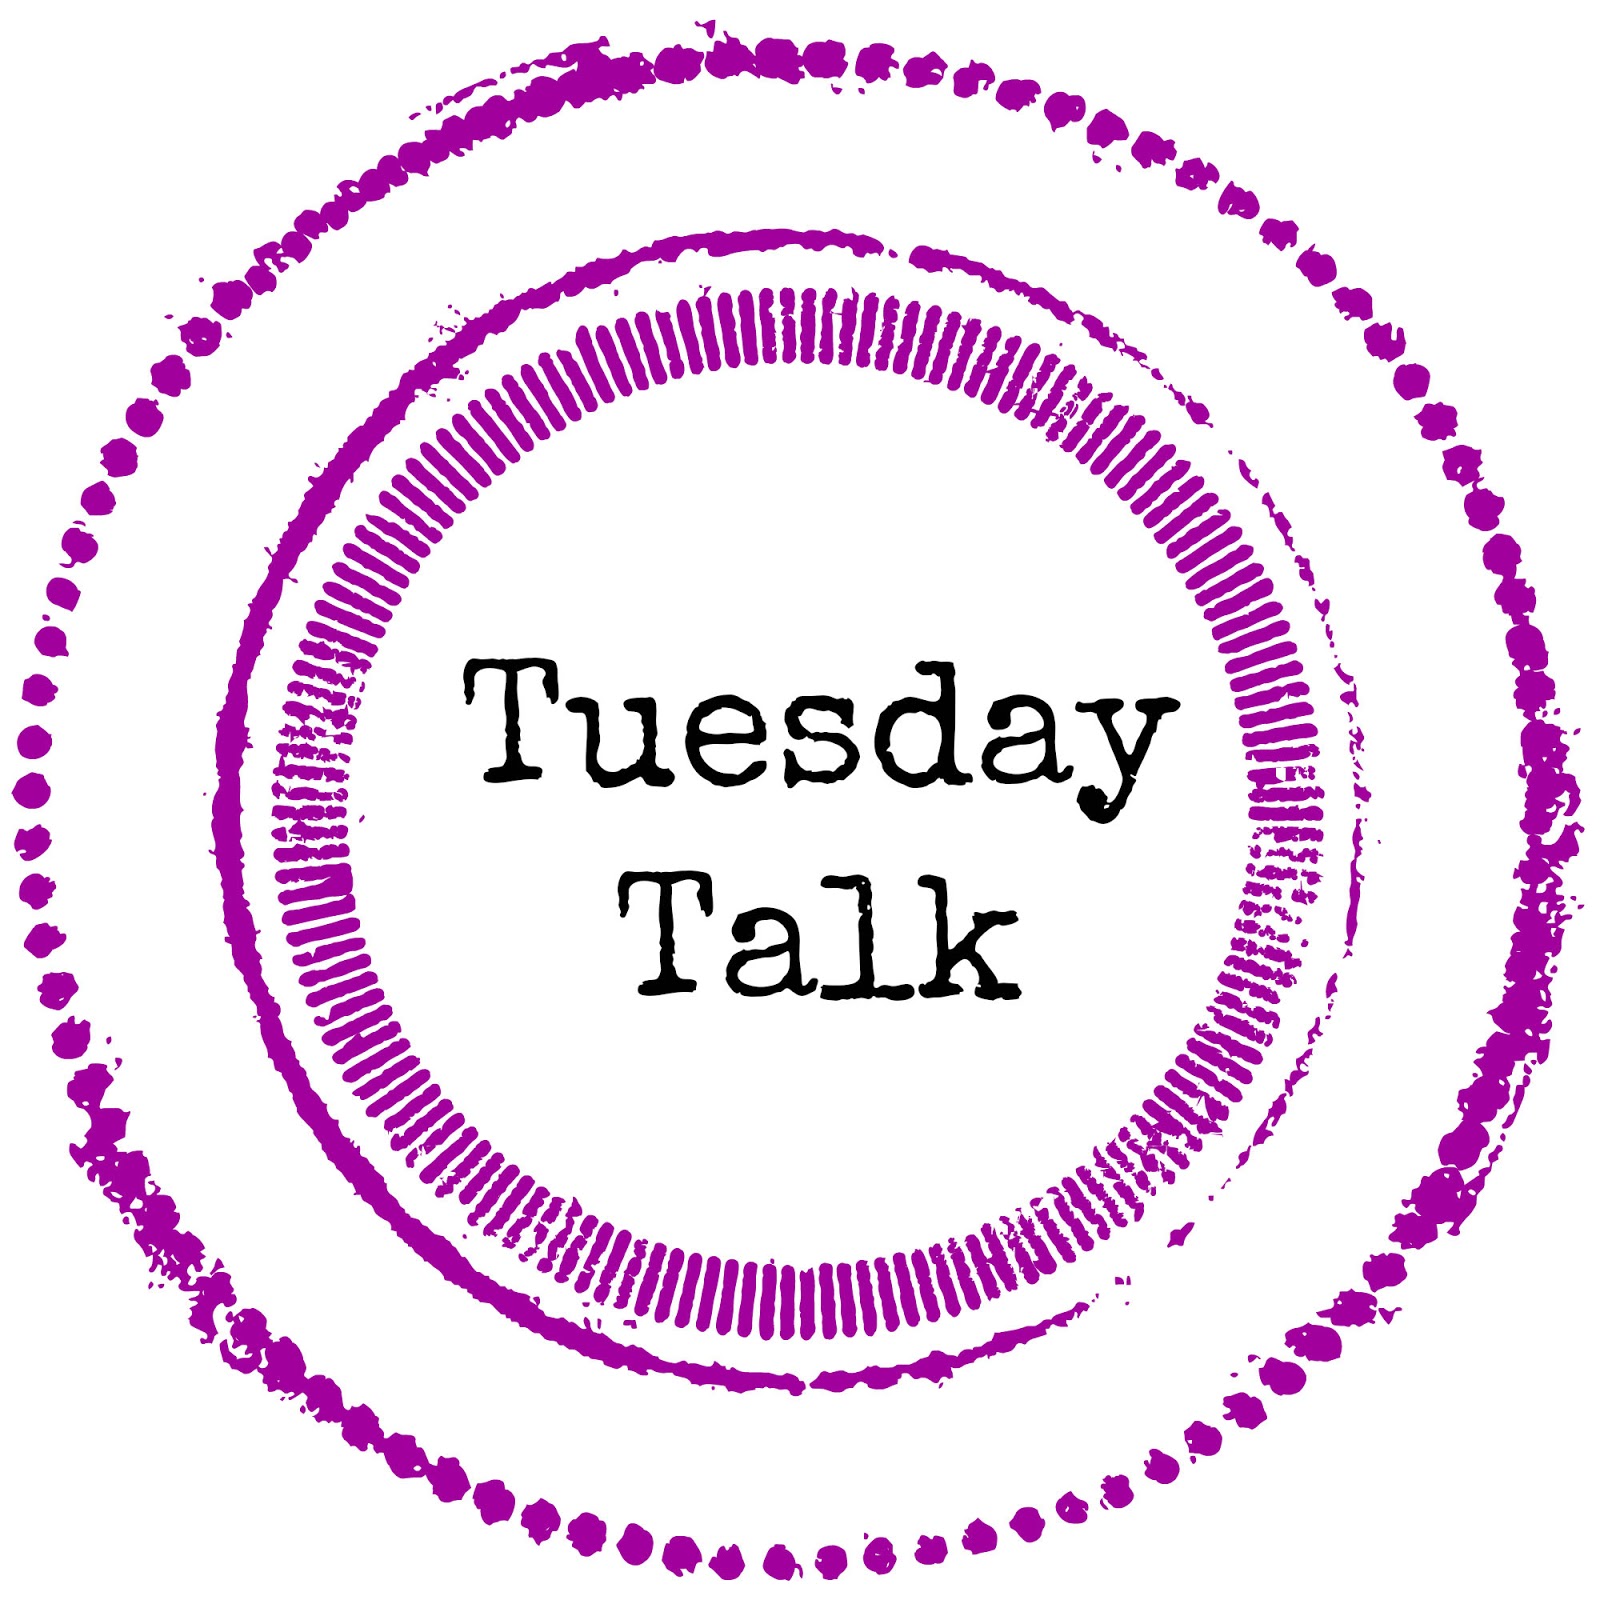 Sweet Little Ones - Tuesday Talk Link Up and Party